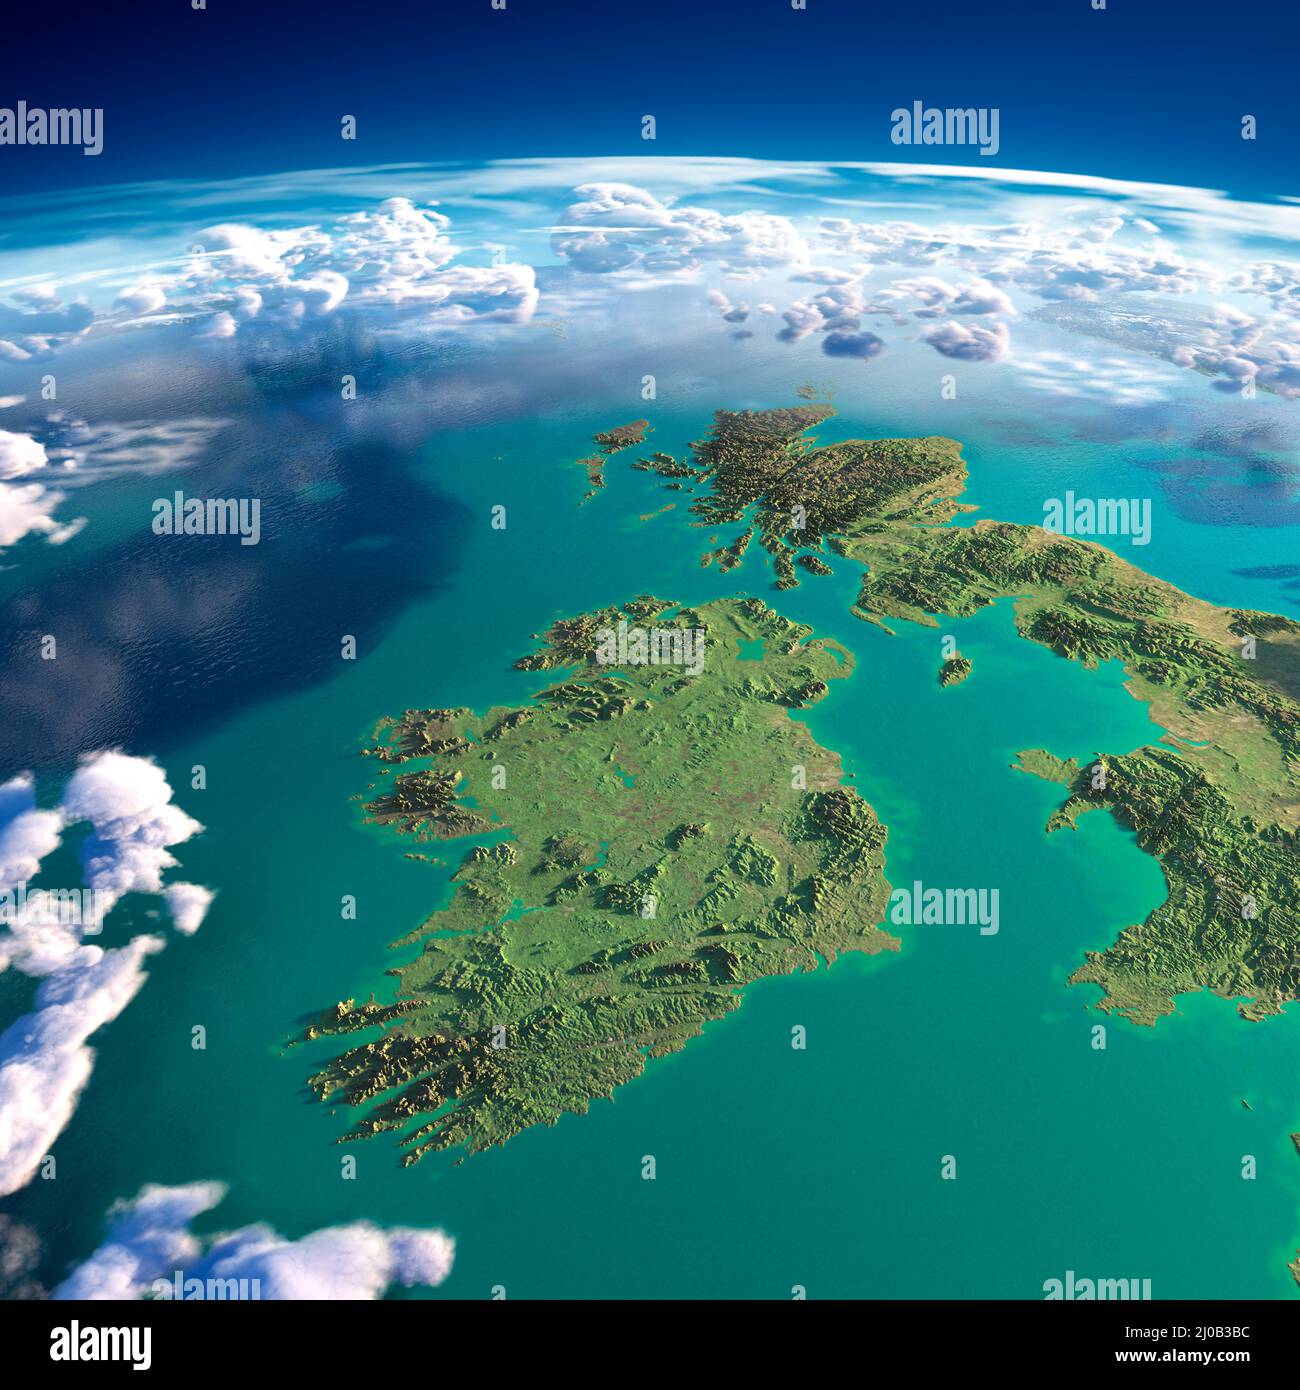 Fragments of the planet Earth. Ireland and UK Stock Photo